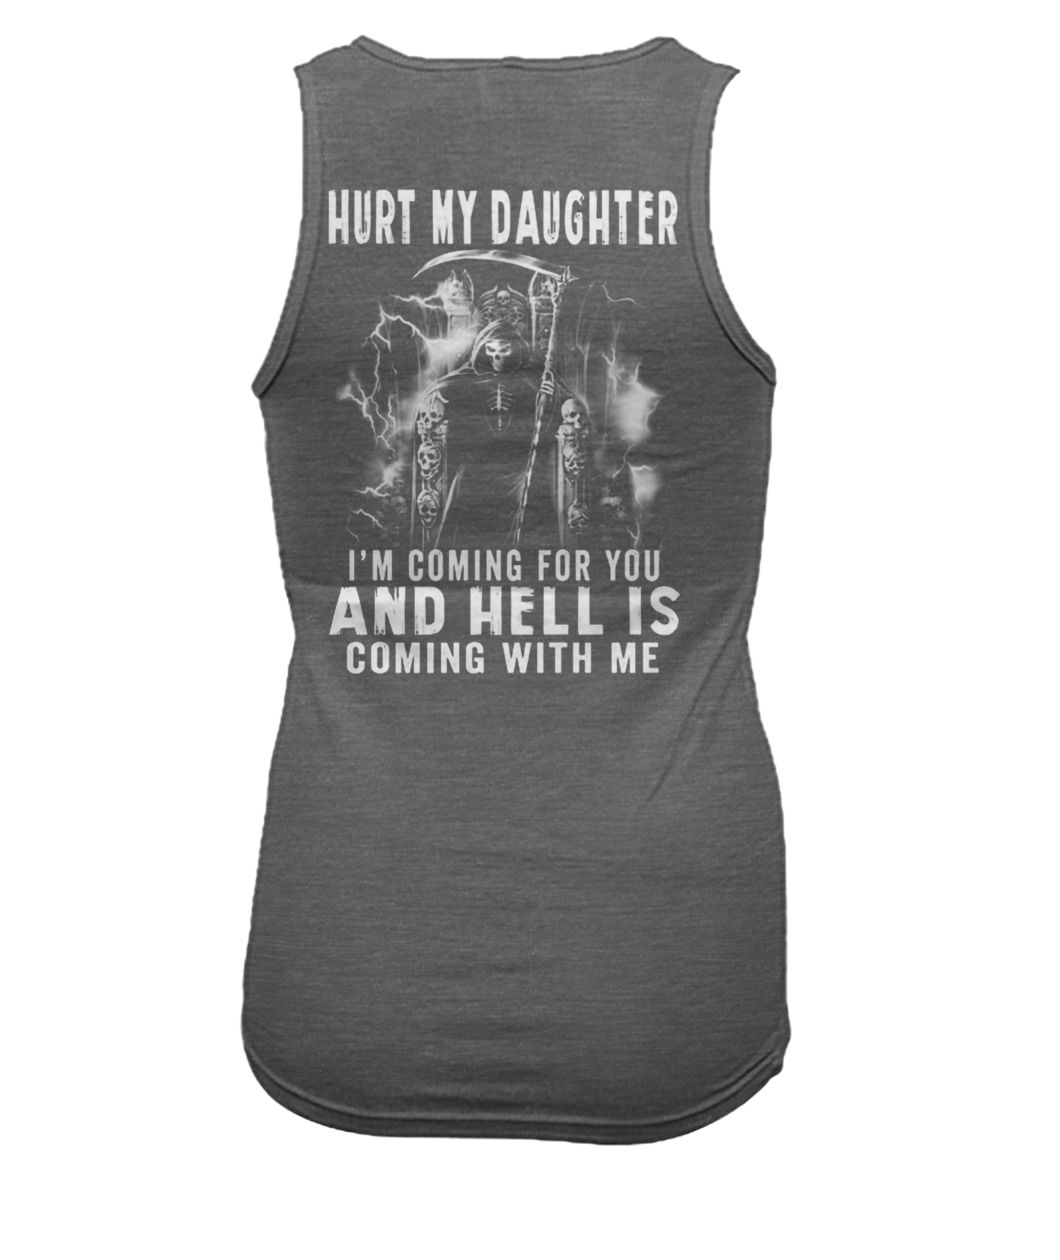 Hurt my daughter I'm coming for you and hell is coming with me women's tank top